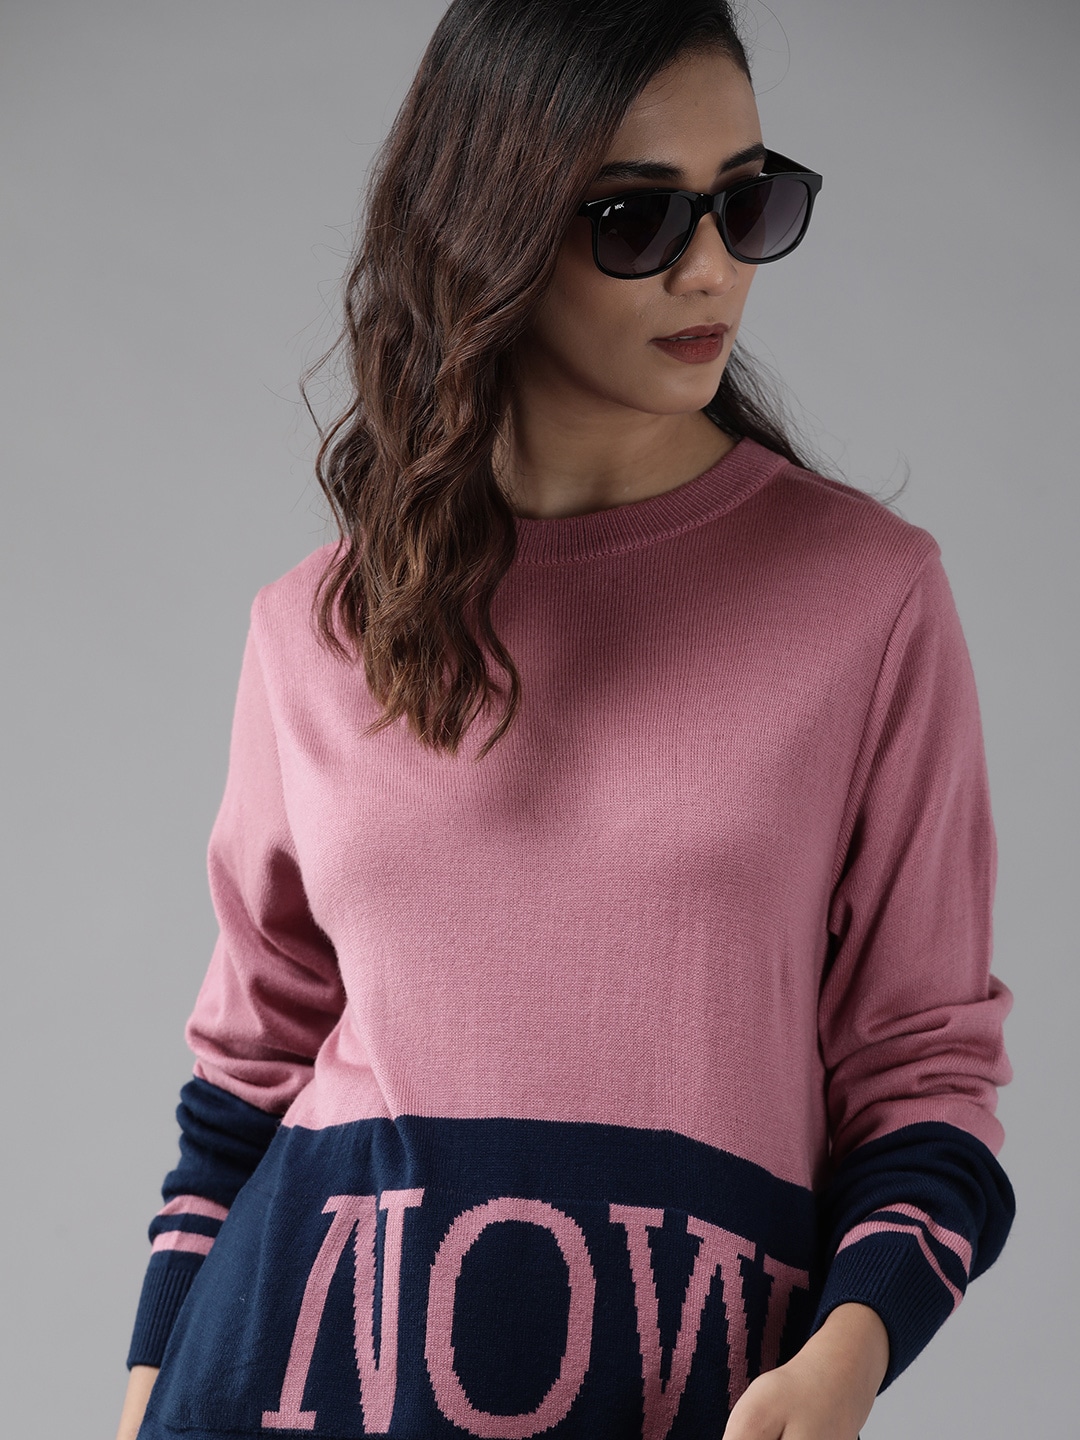 Roadster Women Pink & Navy Blue Typography Pattern Sweater with Colourblock Effect Price in India